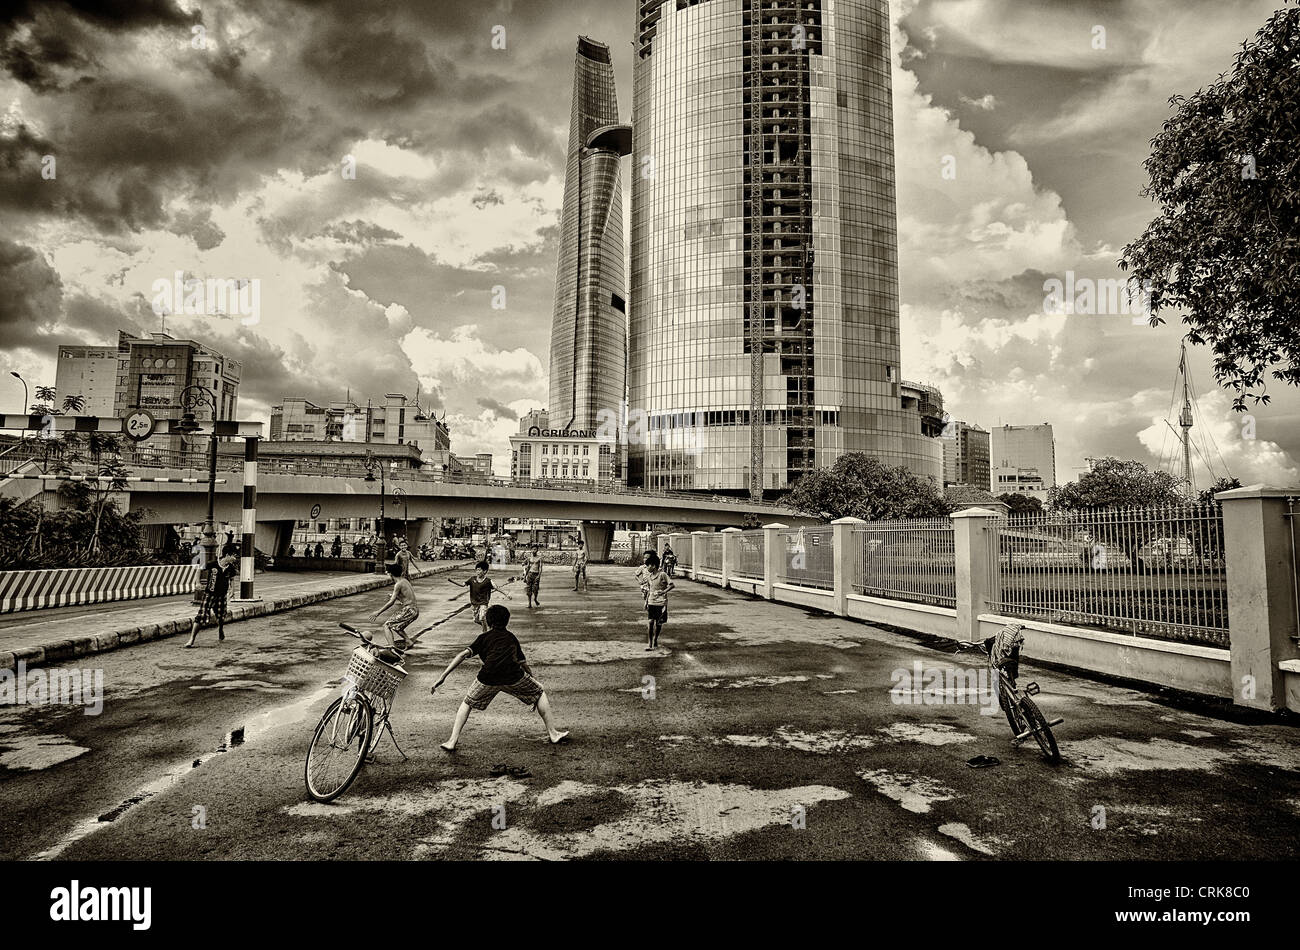 In HCMC, Vietnam, kids are playing football under the skyscrapers in the stormy weather Stock Photo